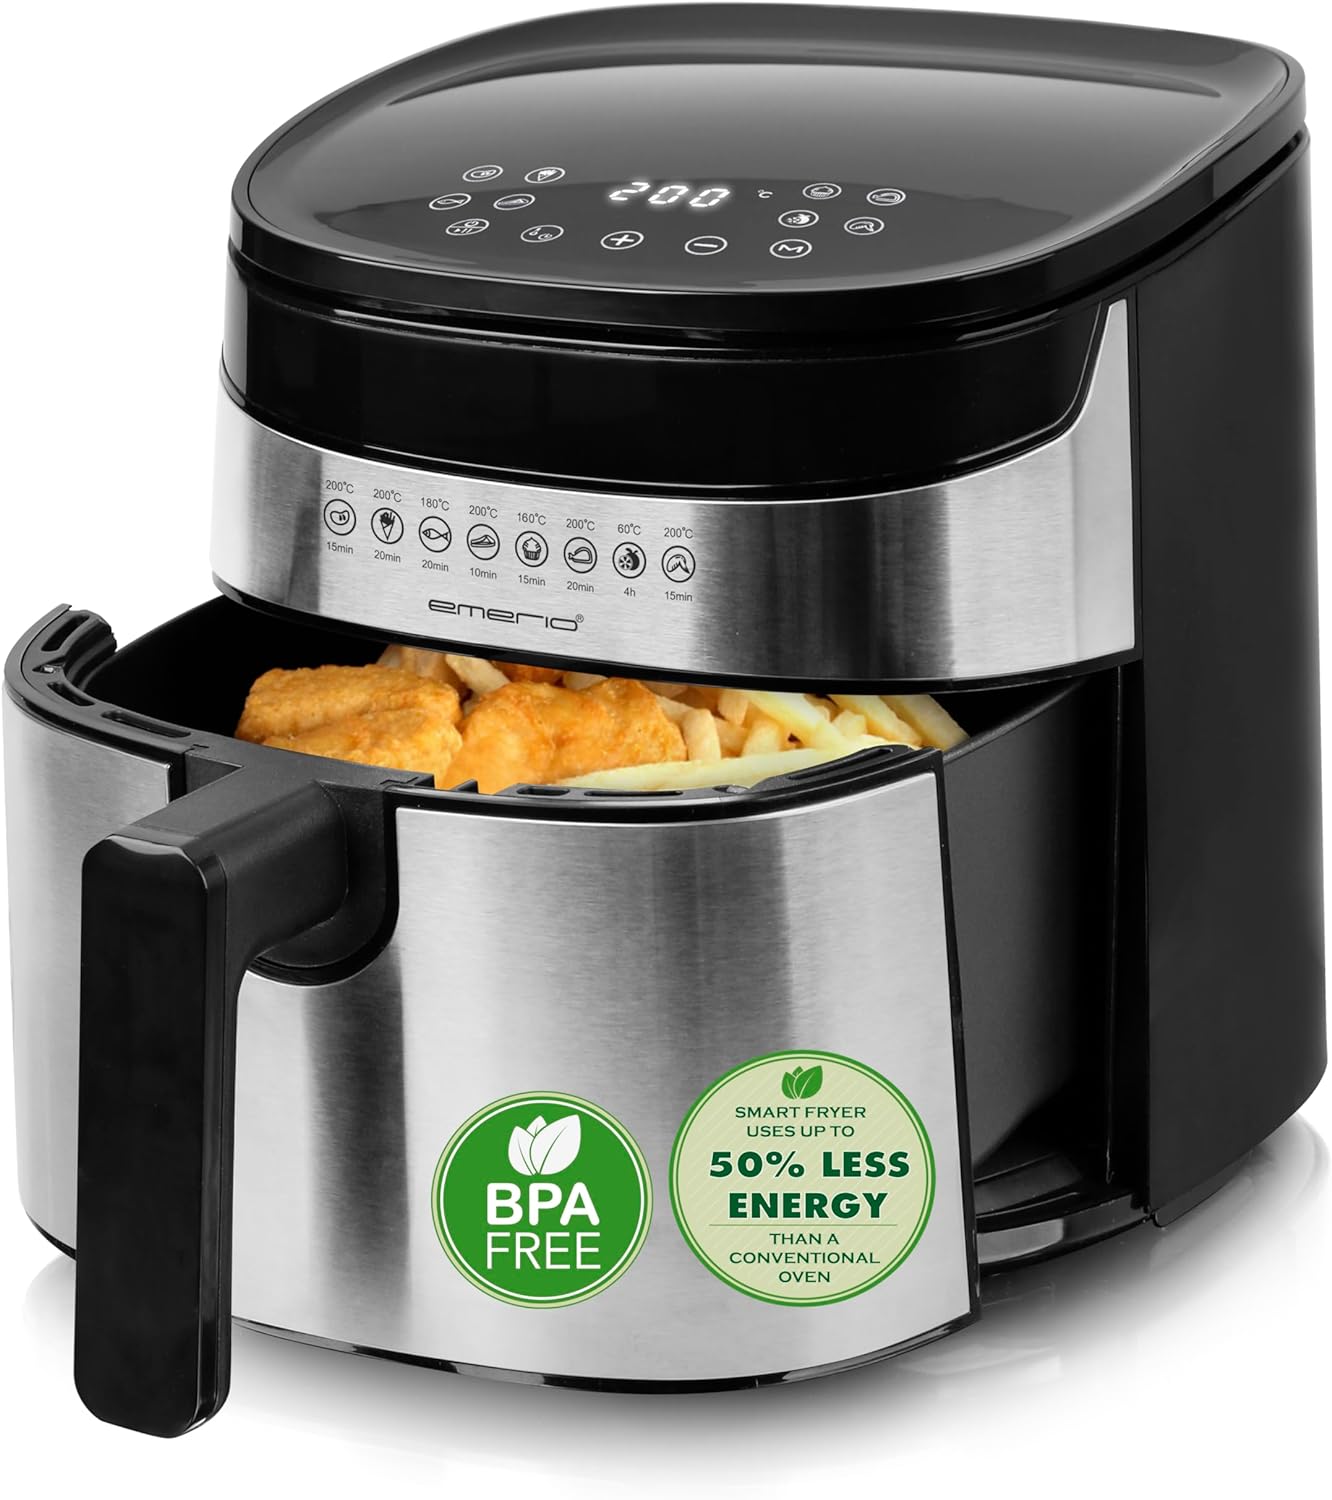 Emerio 4.5 LITRE LARGE Digital Hot Air Frory Top Airfryer Frying Without Additional Oil 8 Automatic Programs Stainless Steel Inox BPA Free Quick Heating Easy To Clean 1300 W AF-129084